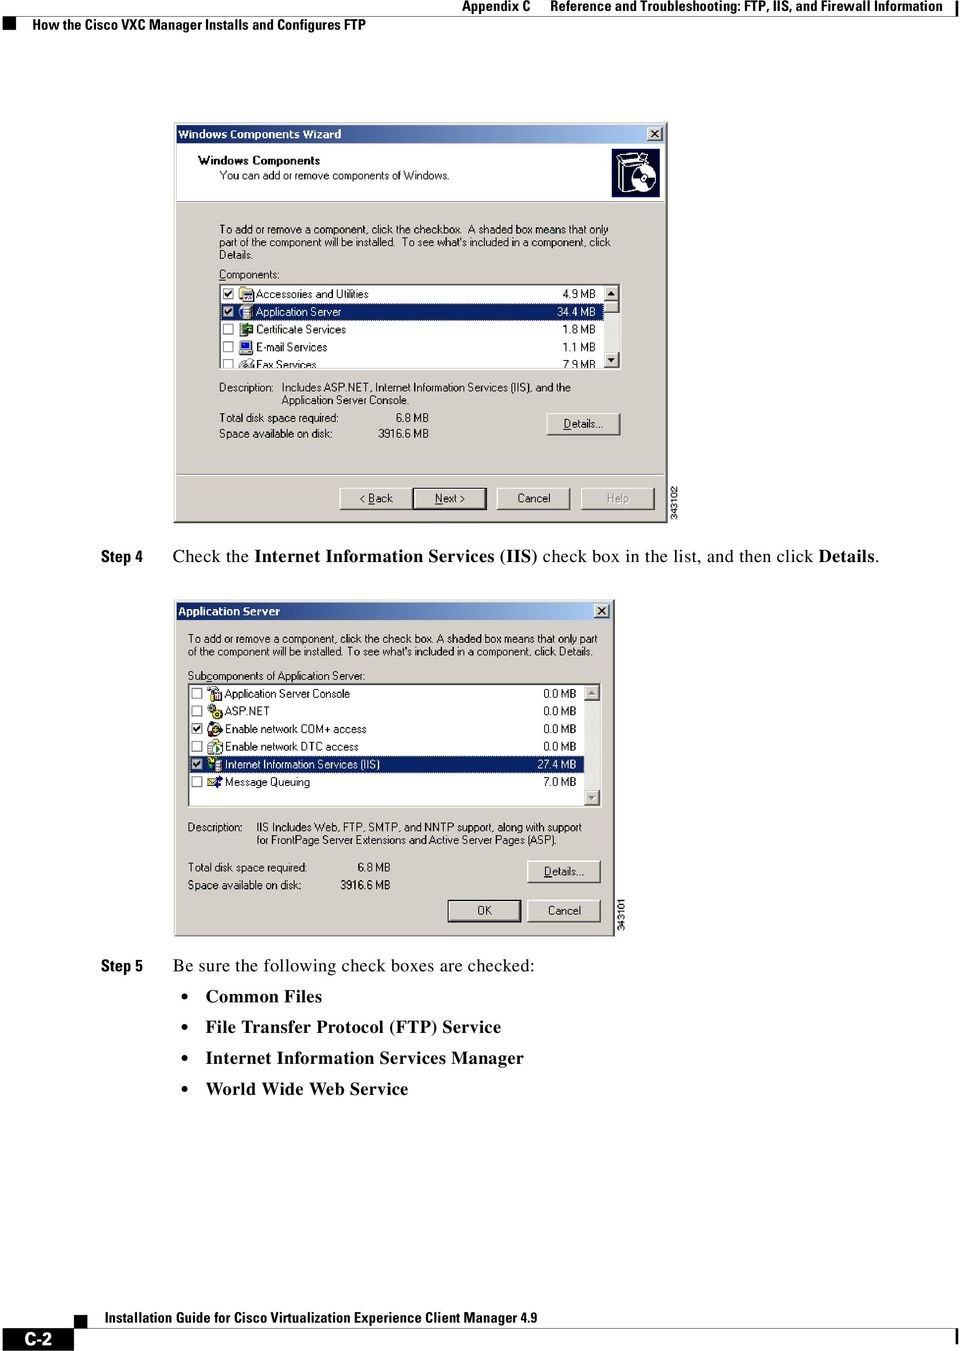 Step 5 Be sure the following check boxes are checked: Common Files File Transfer